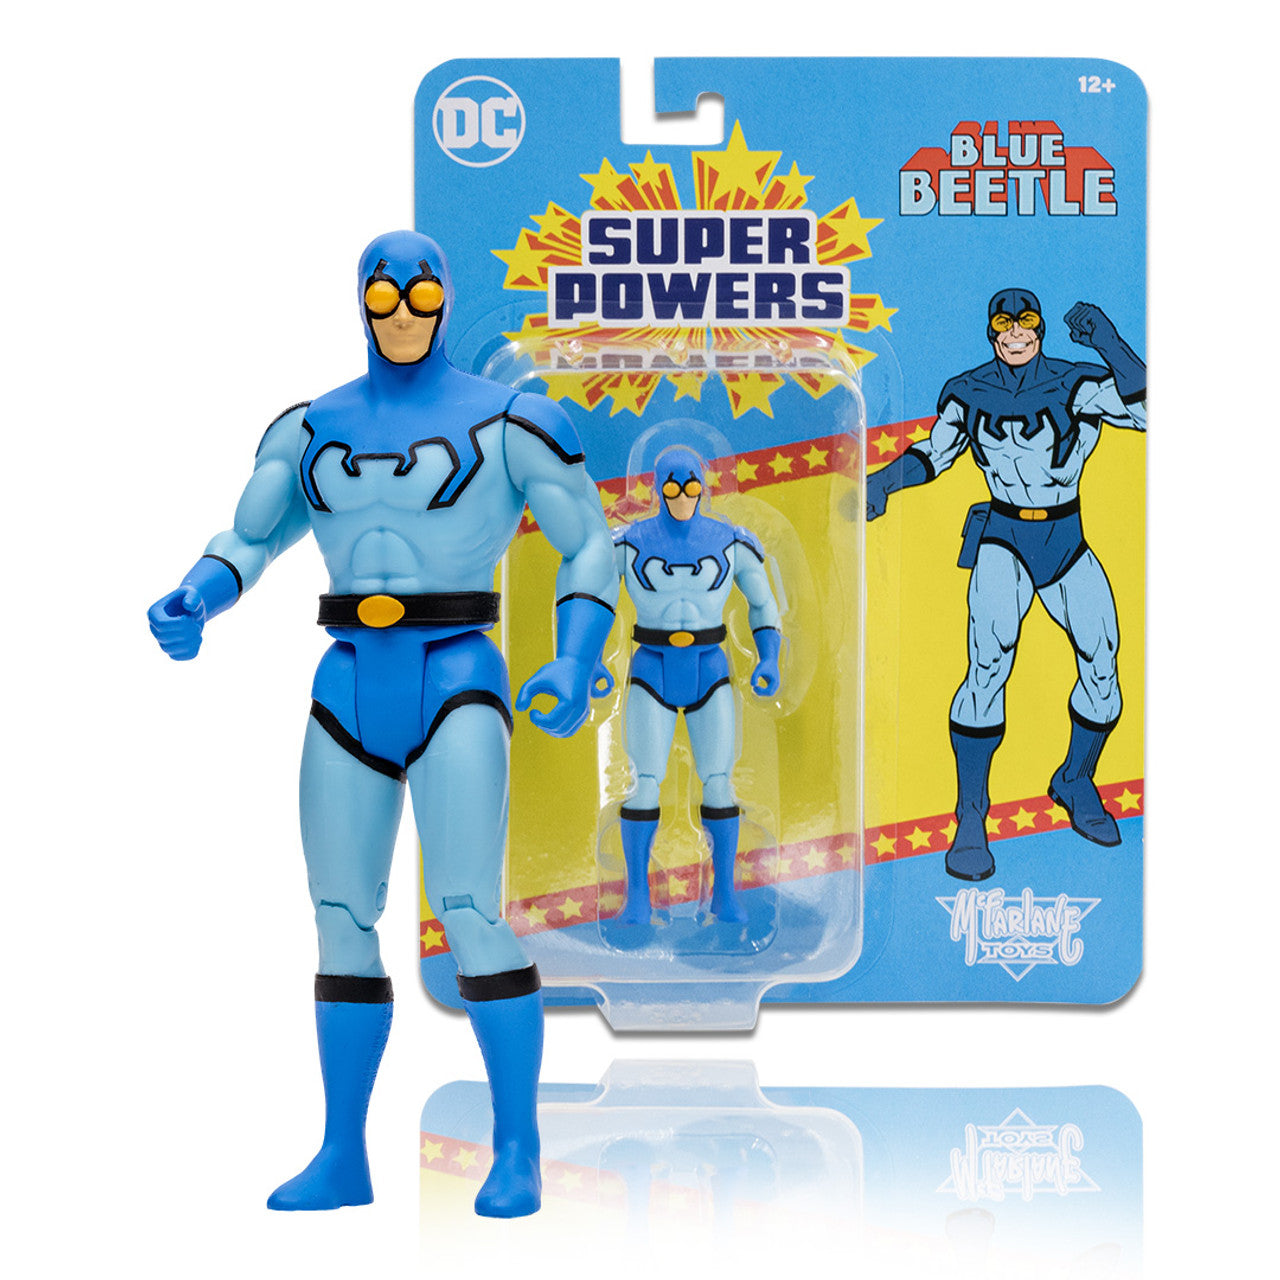 [PRE-ORDER] DC Super Powers - Action Figures and Vehicles - Bundle Set of 6 Items